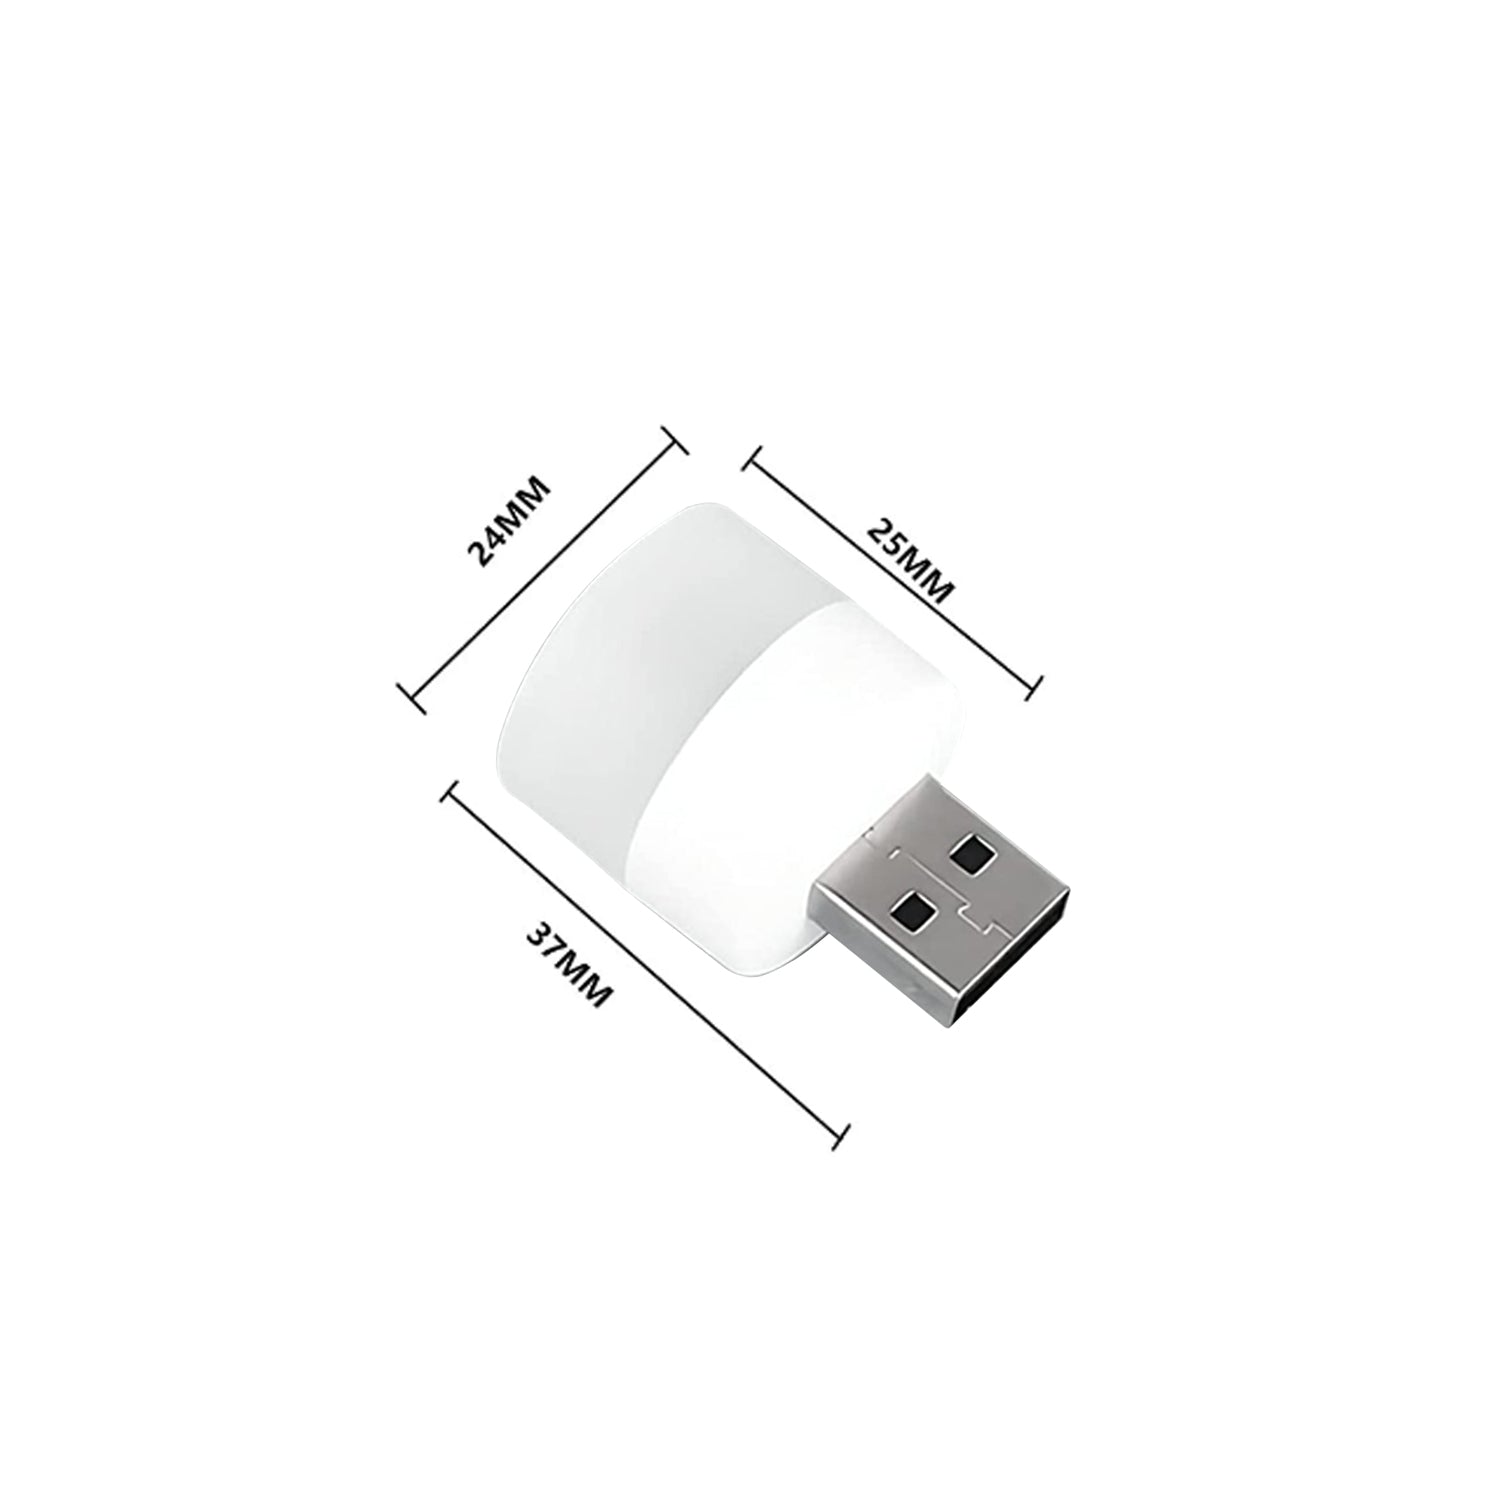 6096 Small USB Bulb used in all kinds of household and official places for room lighting purposes.